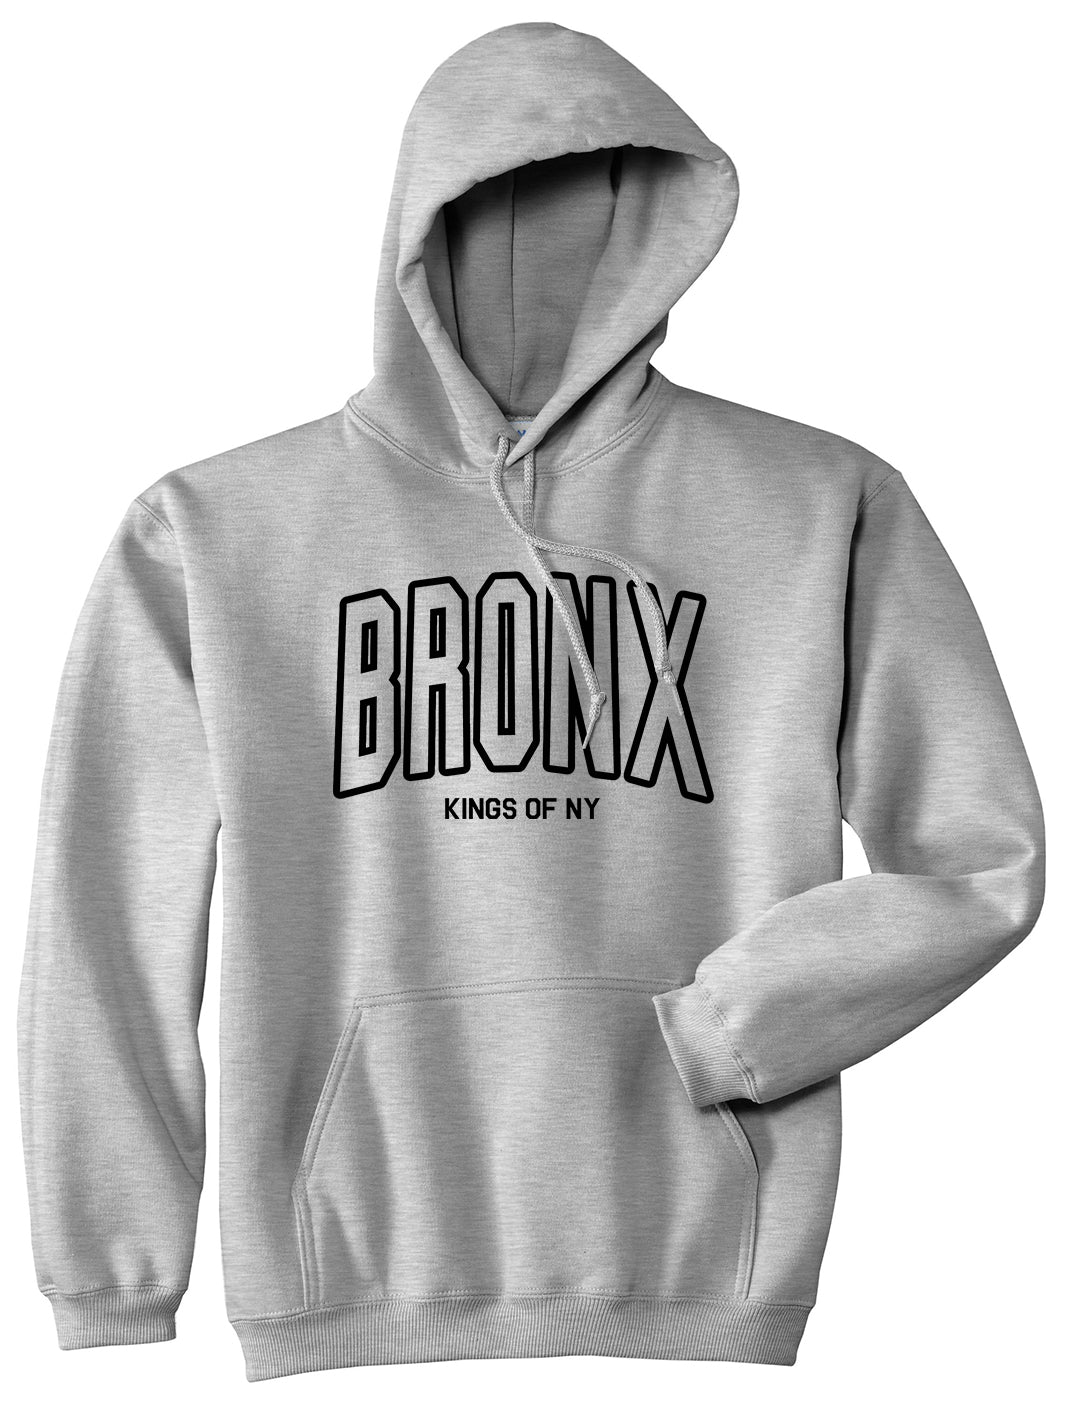 BRONX College Outline Mens Pullover Hoodie Grey by Kings Of NY